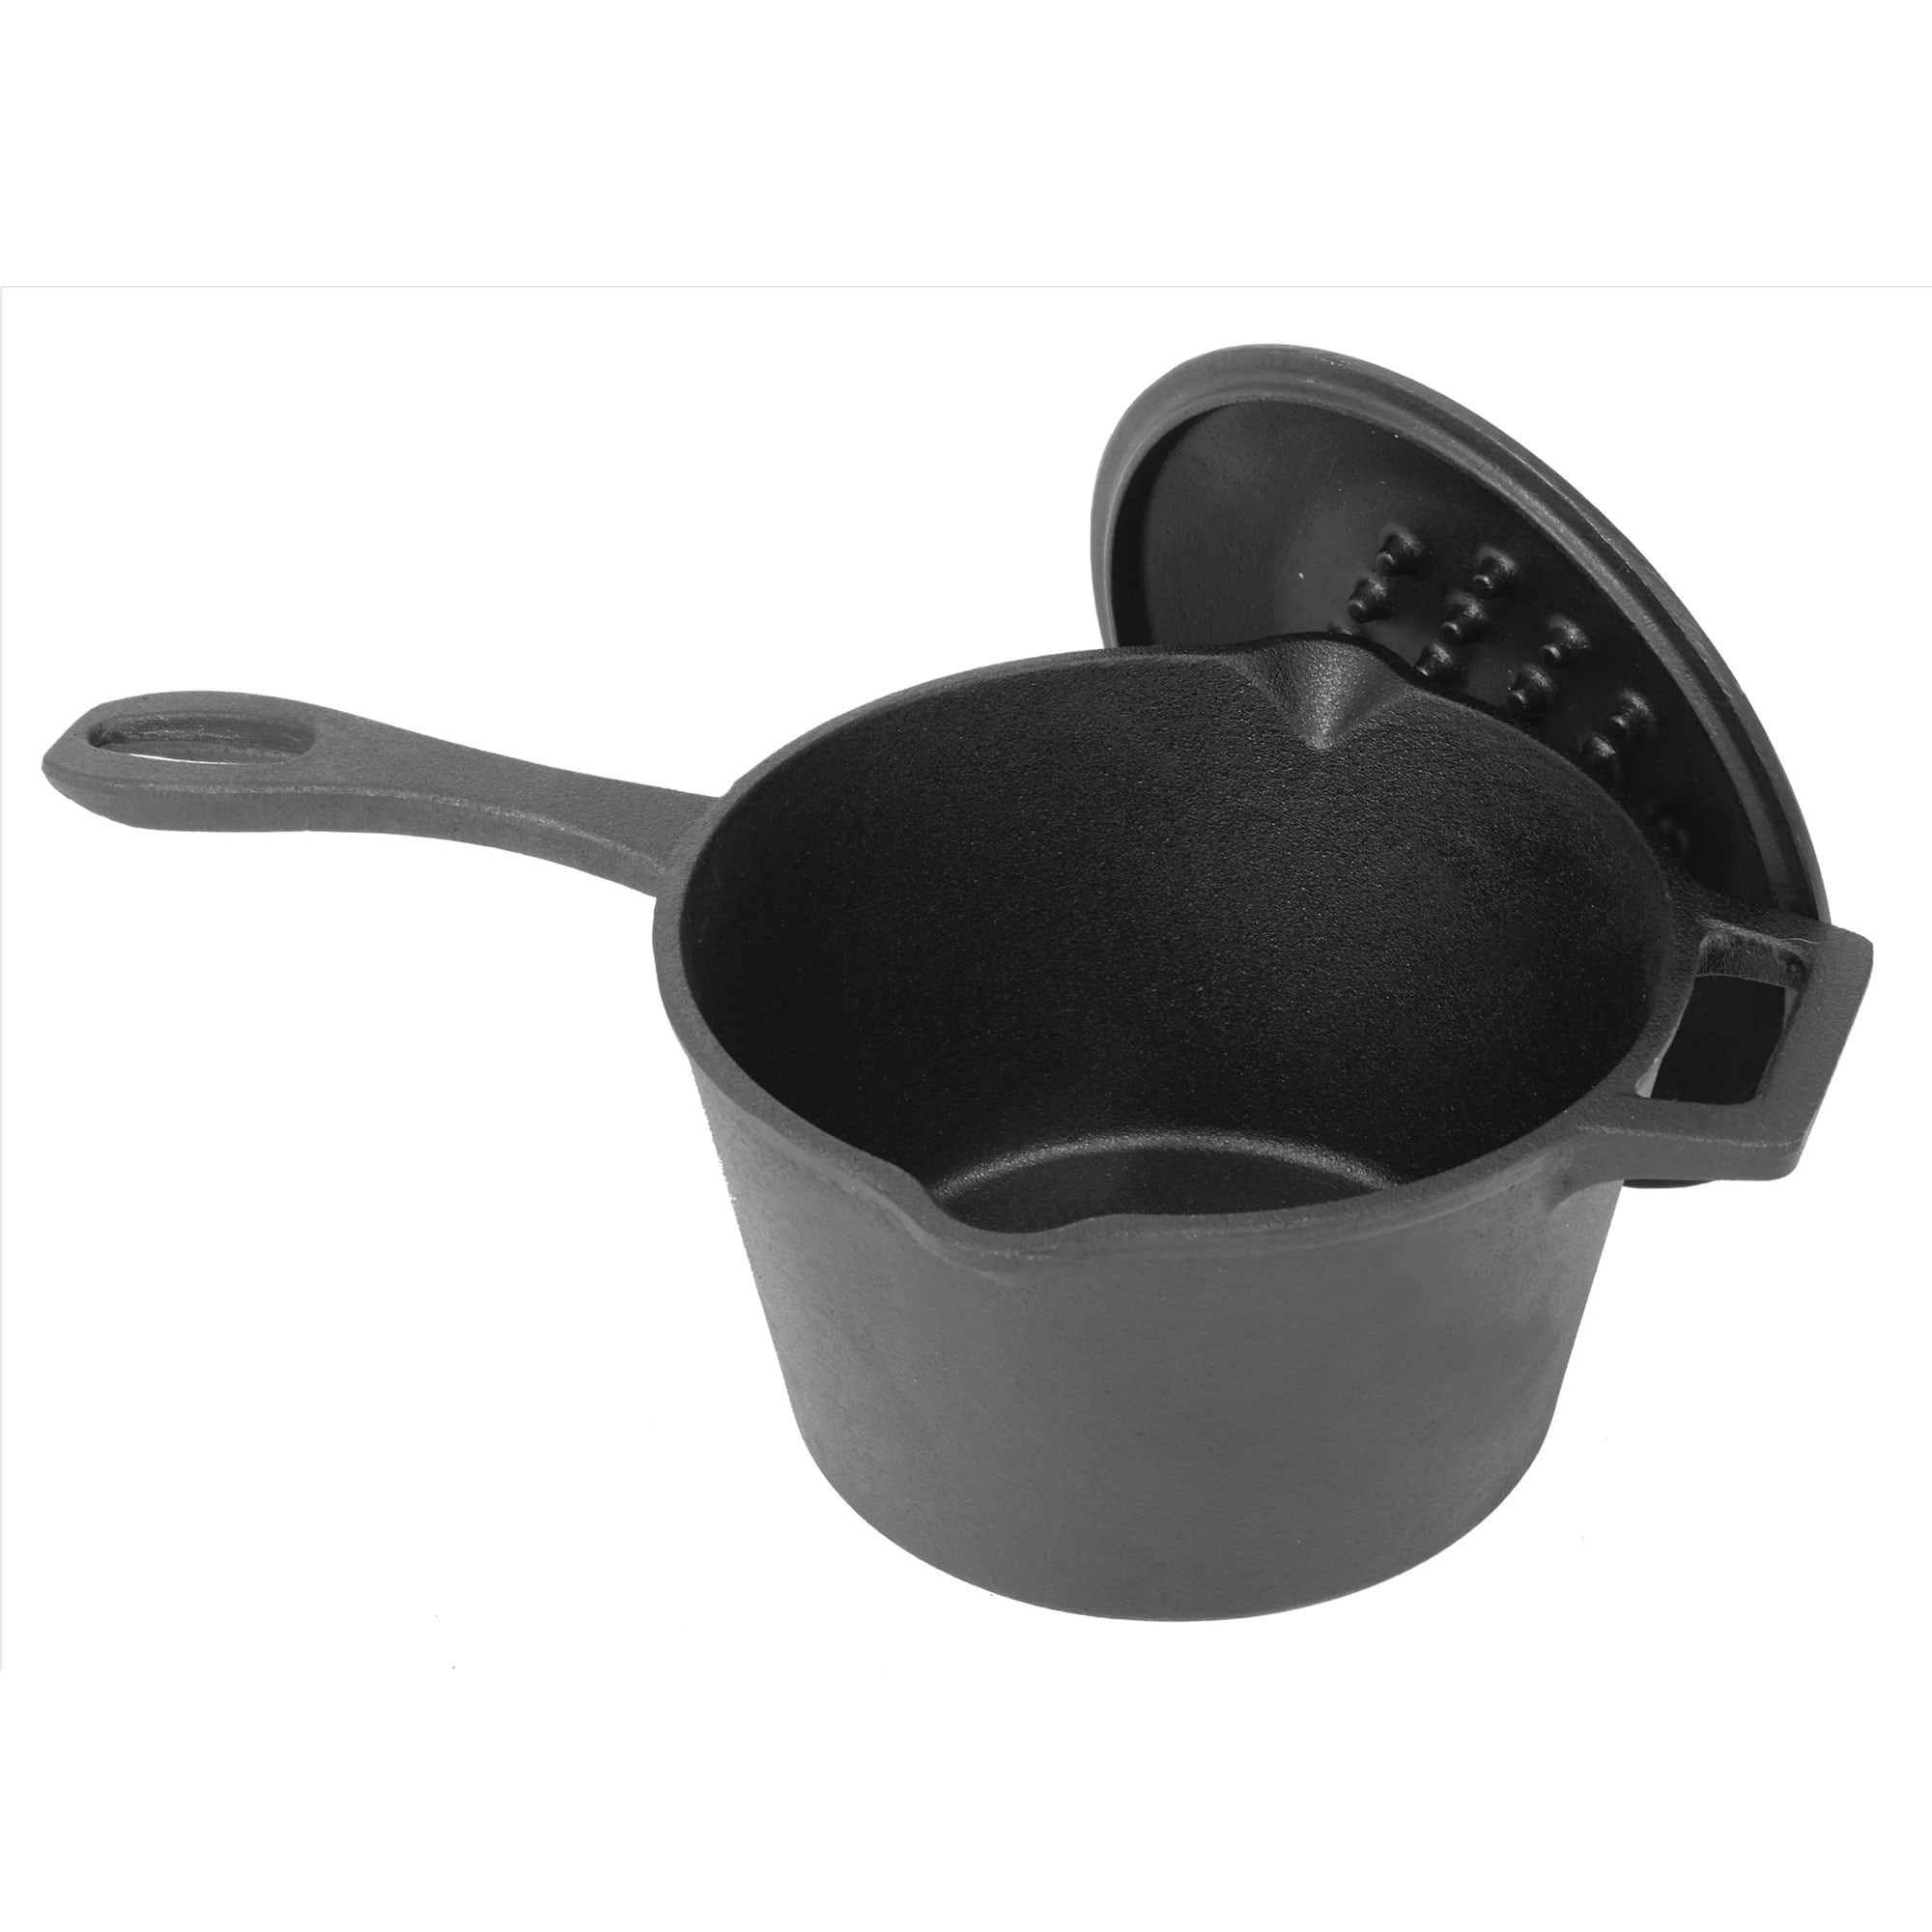 https://ak1.ostkcdn.com/images/products/is/images/direct/b7e9533593d08bcce862626c7144981b28ac3dc2/Bayou-Classic-2.5-Quart-Cast-Iron-Covered-Sauce-Pot-with-Self-Basting-Lid%2C-Black.jpg